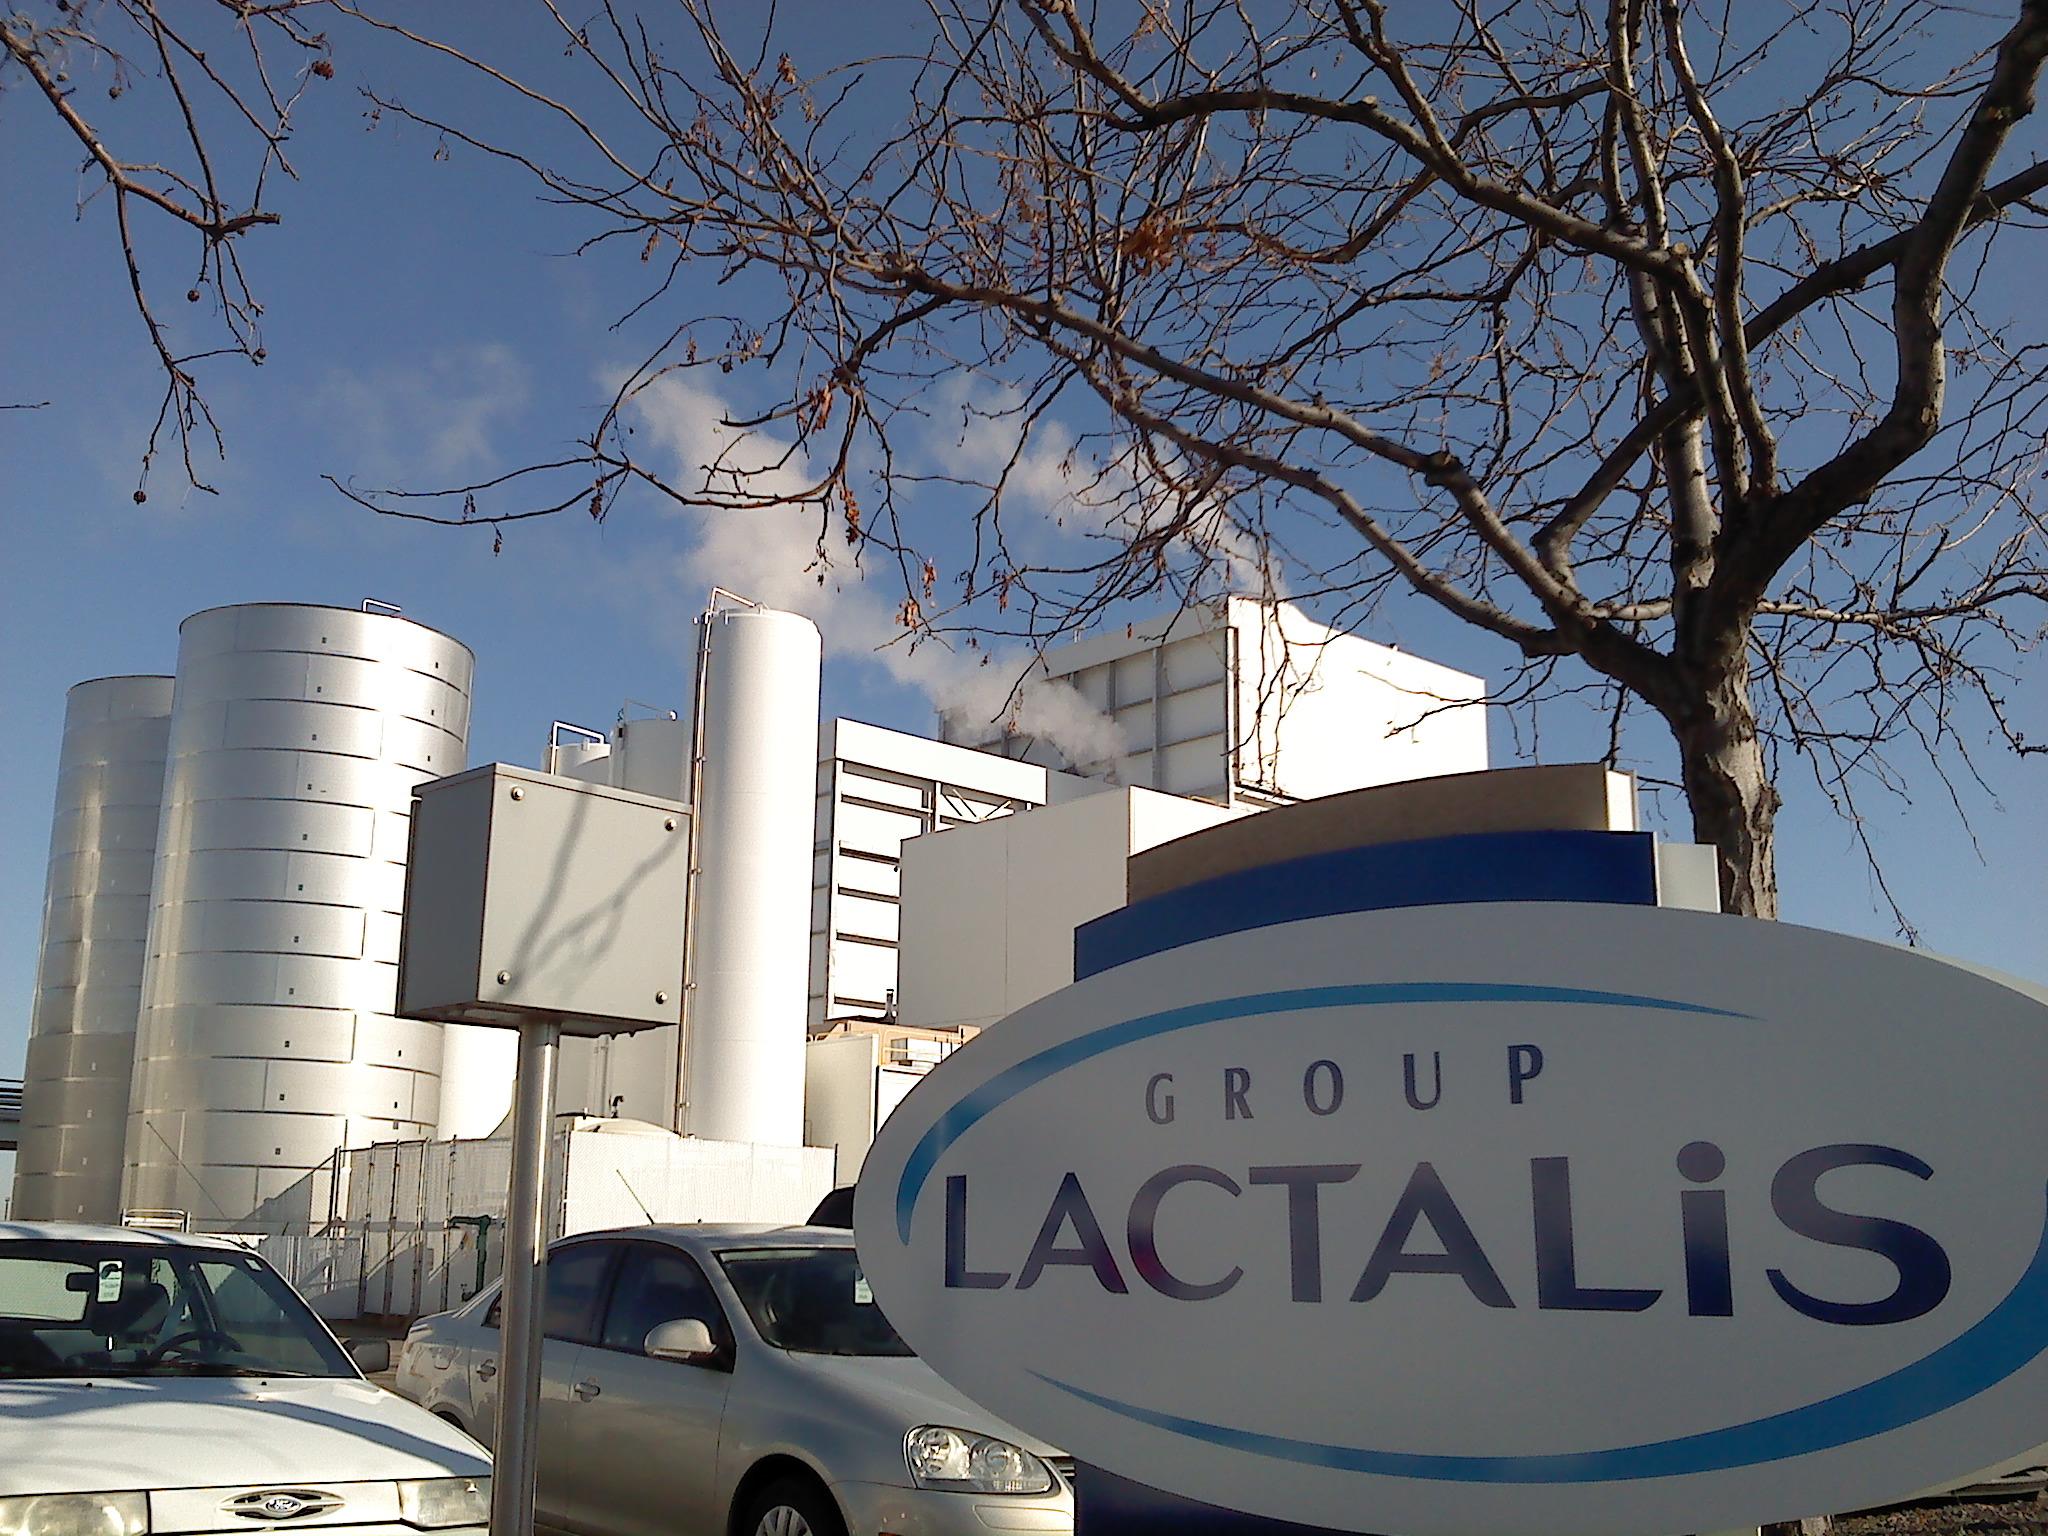 This significant pricing commitment means Lactalis is now paying the industry leading price in the mainstream cheddar sector